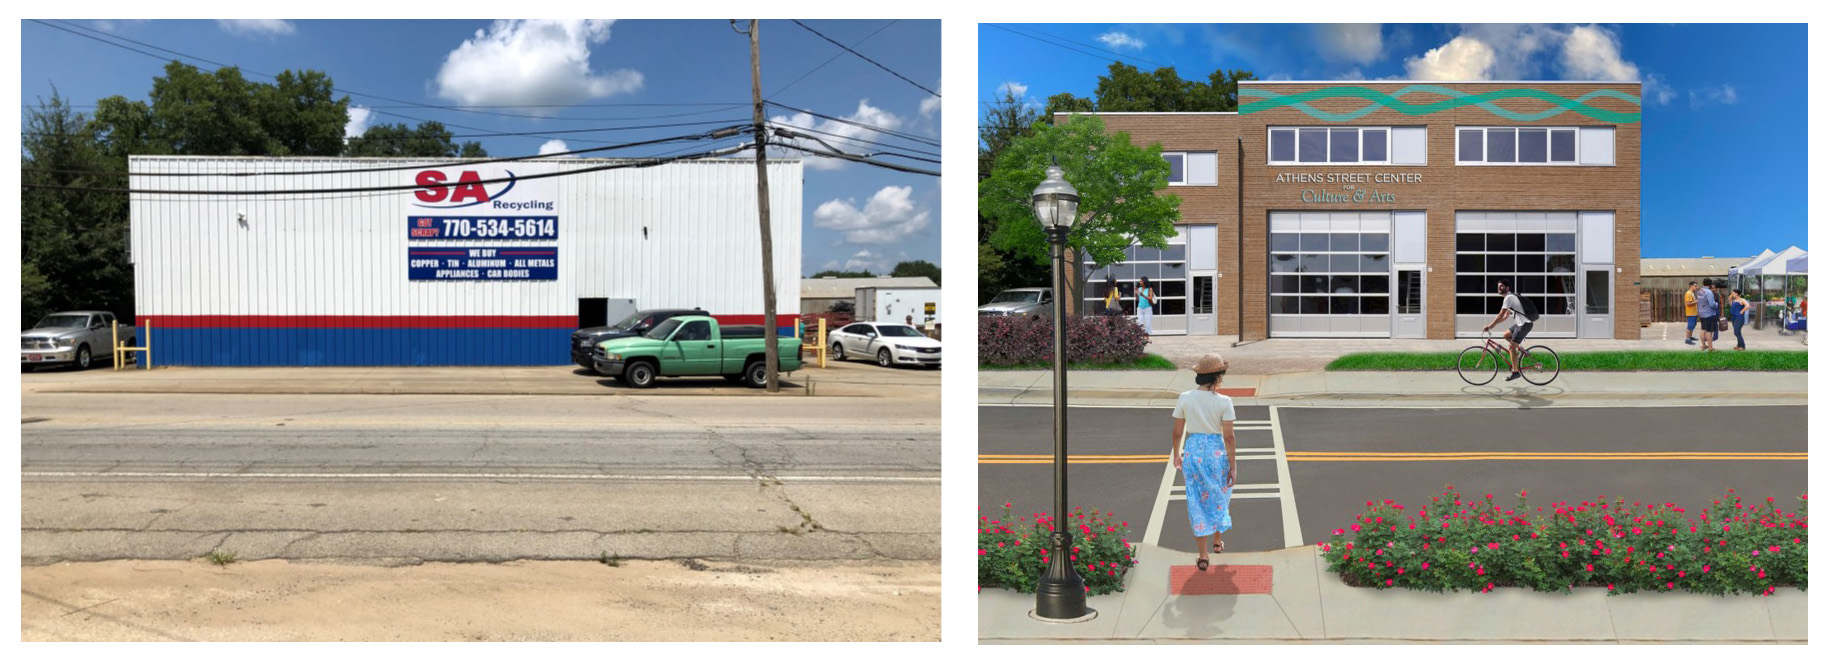 pictures that show the transformation of Athens Street in Gainesville. On the left is the current building and on the right is a drawing of how it could look, including building sidewalks and crosswalks.